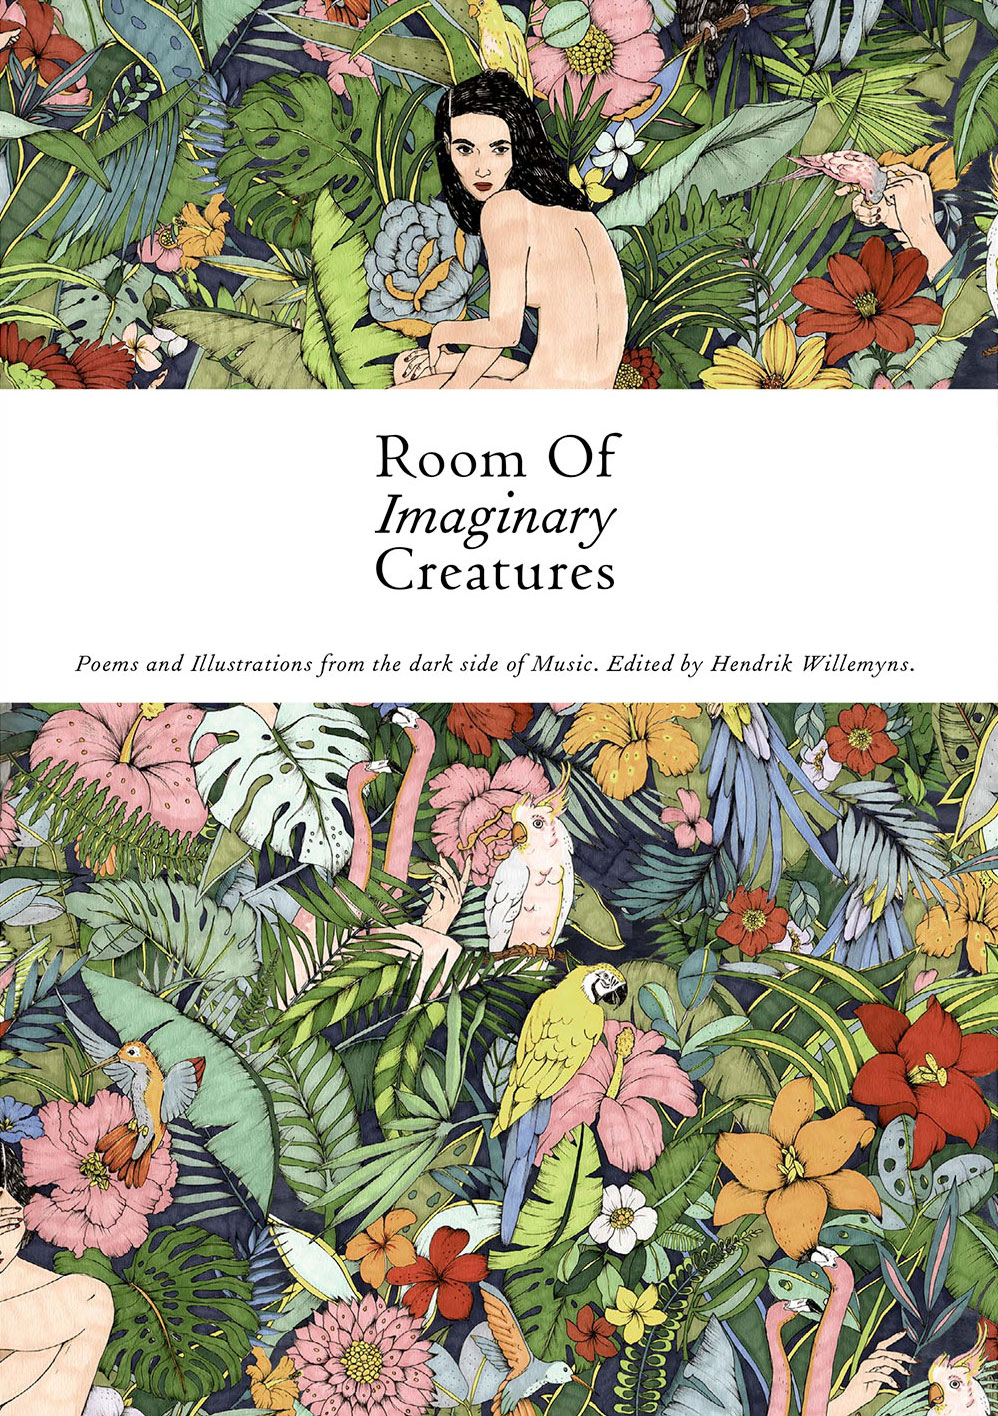 Room-of-Imaginary-Creatures